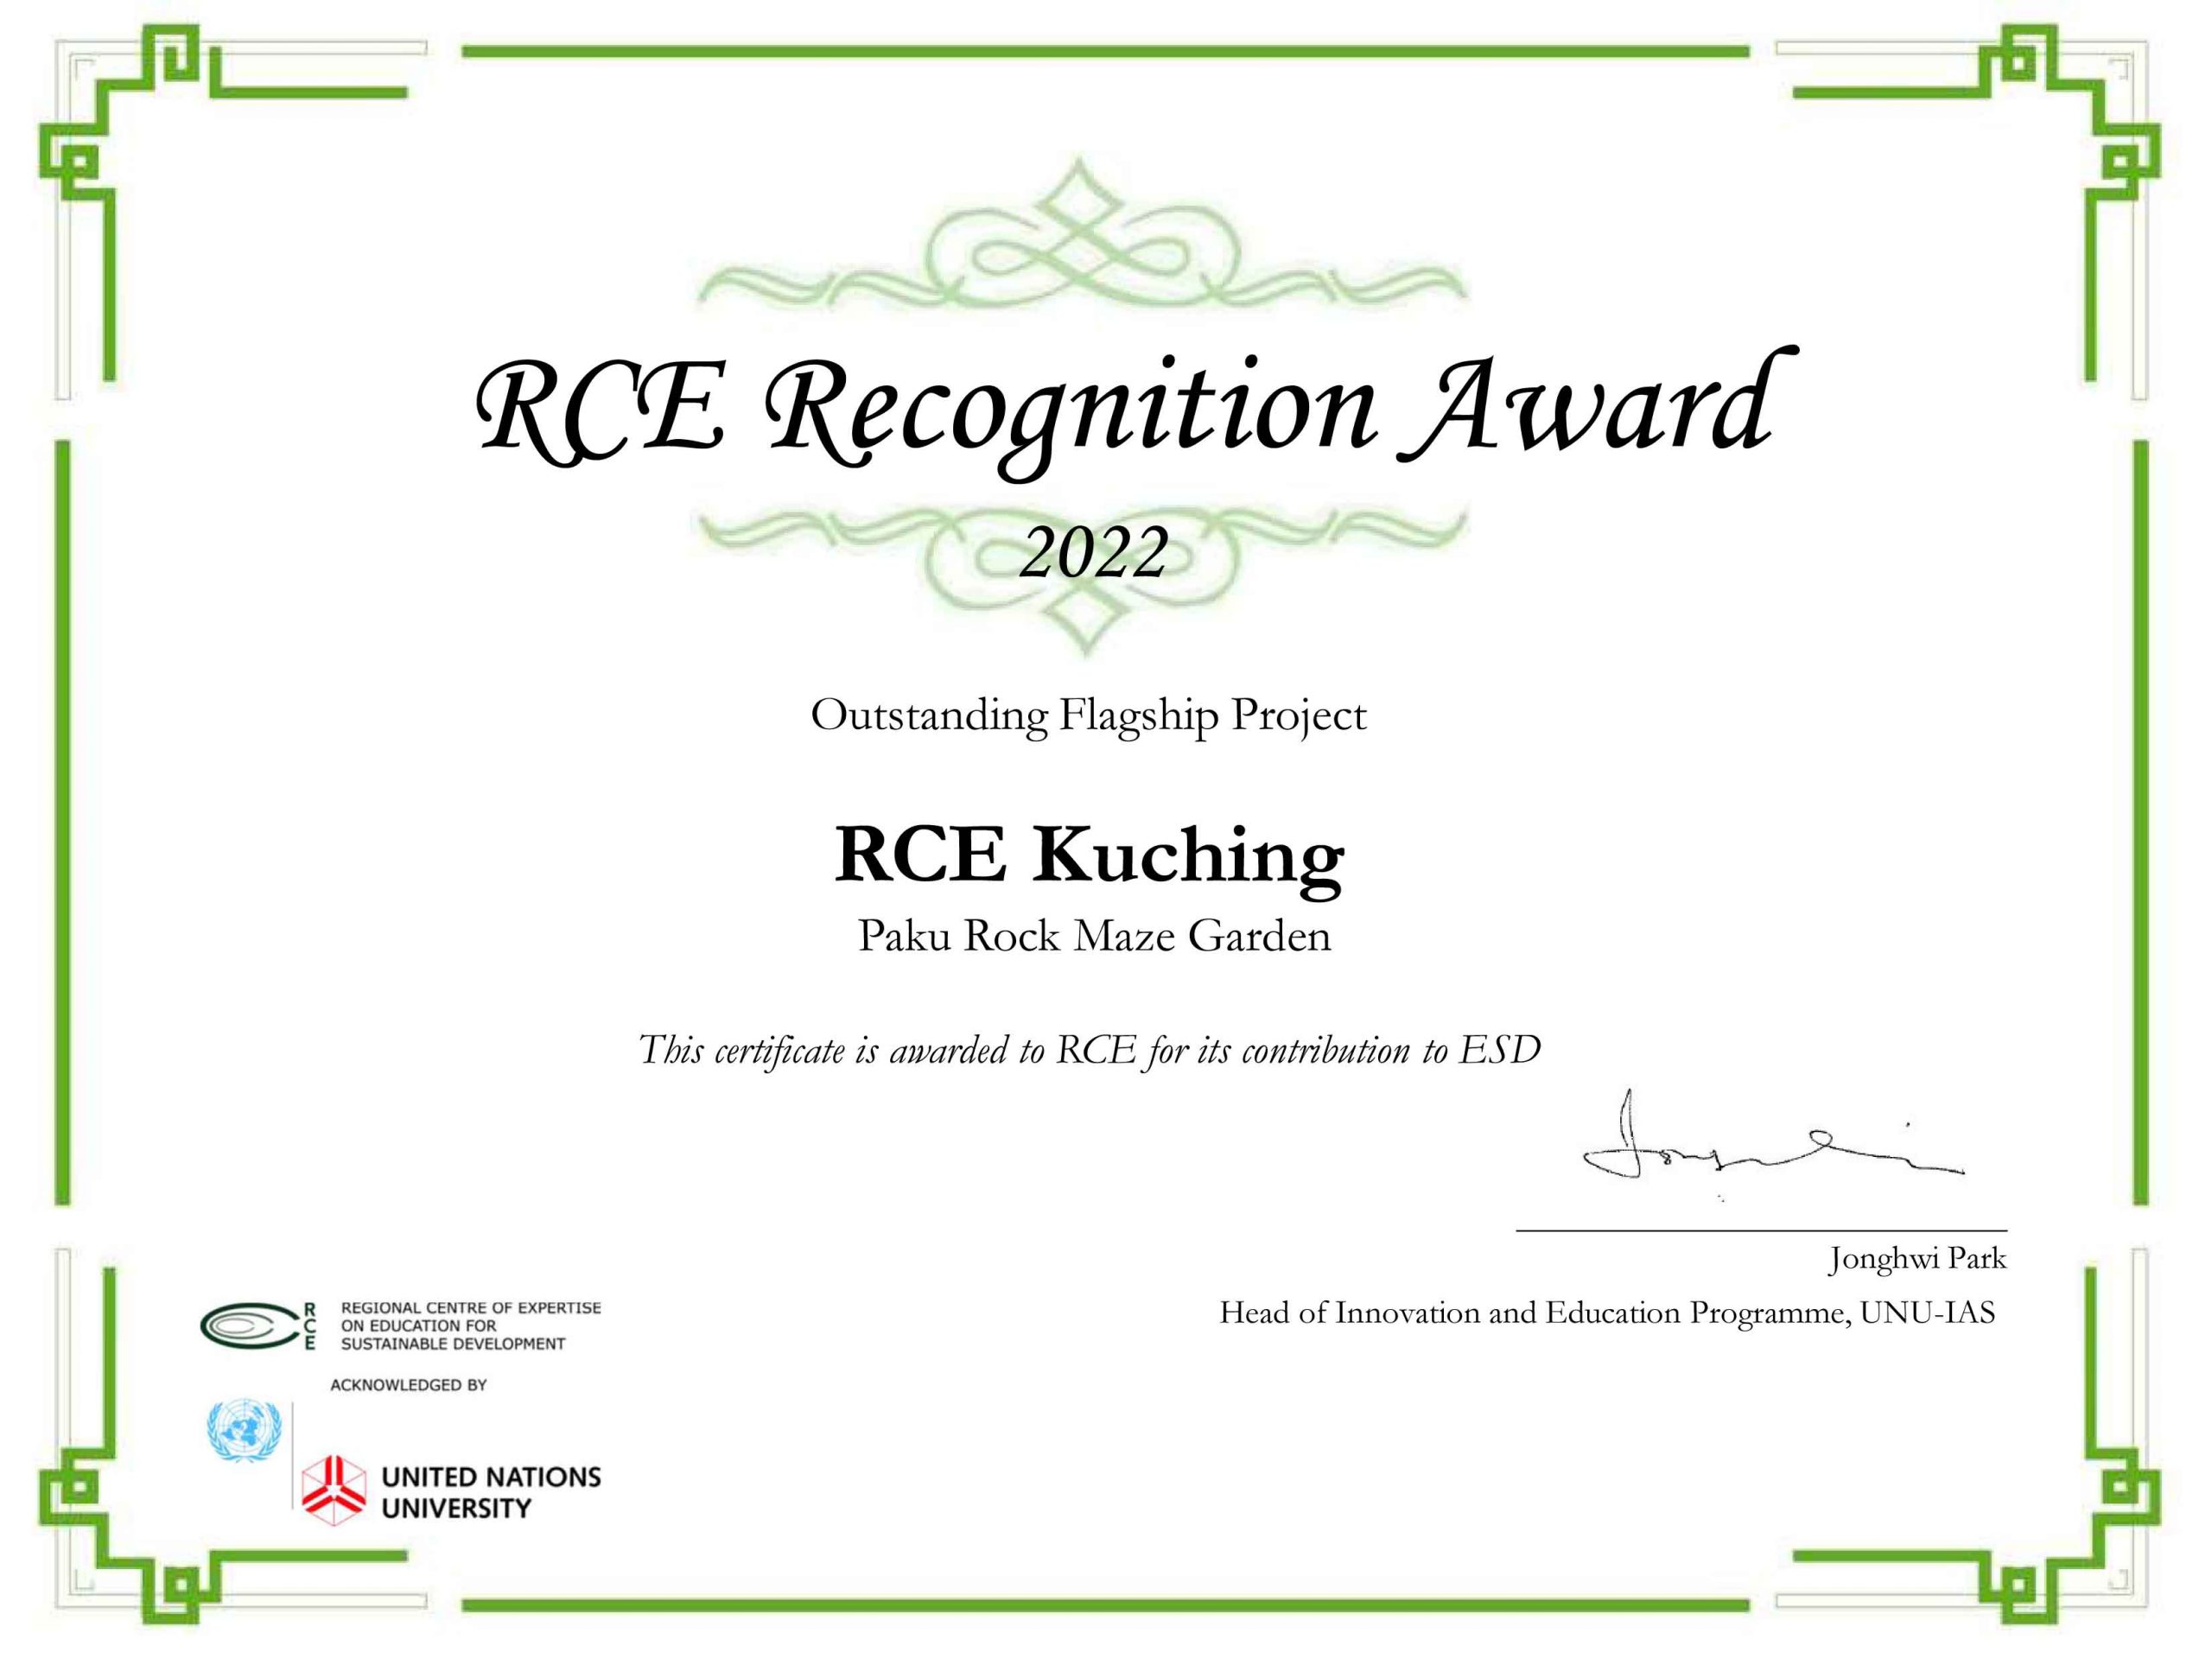 Microsoft PowerPoint - RCE Recognition Award Certificates_2022_O